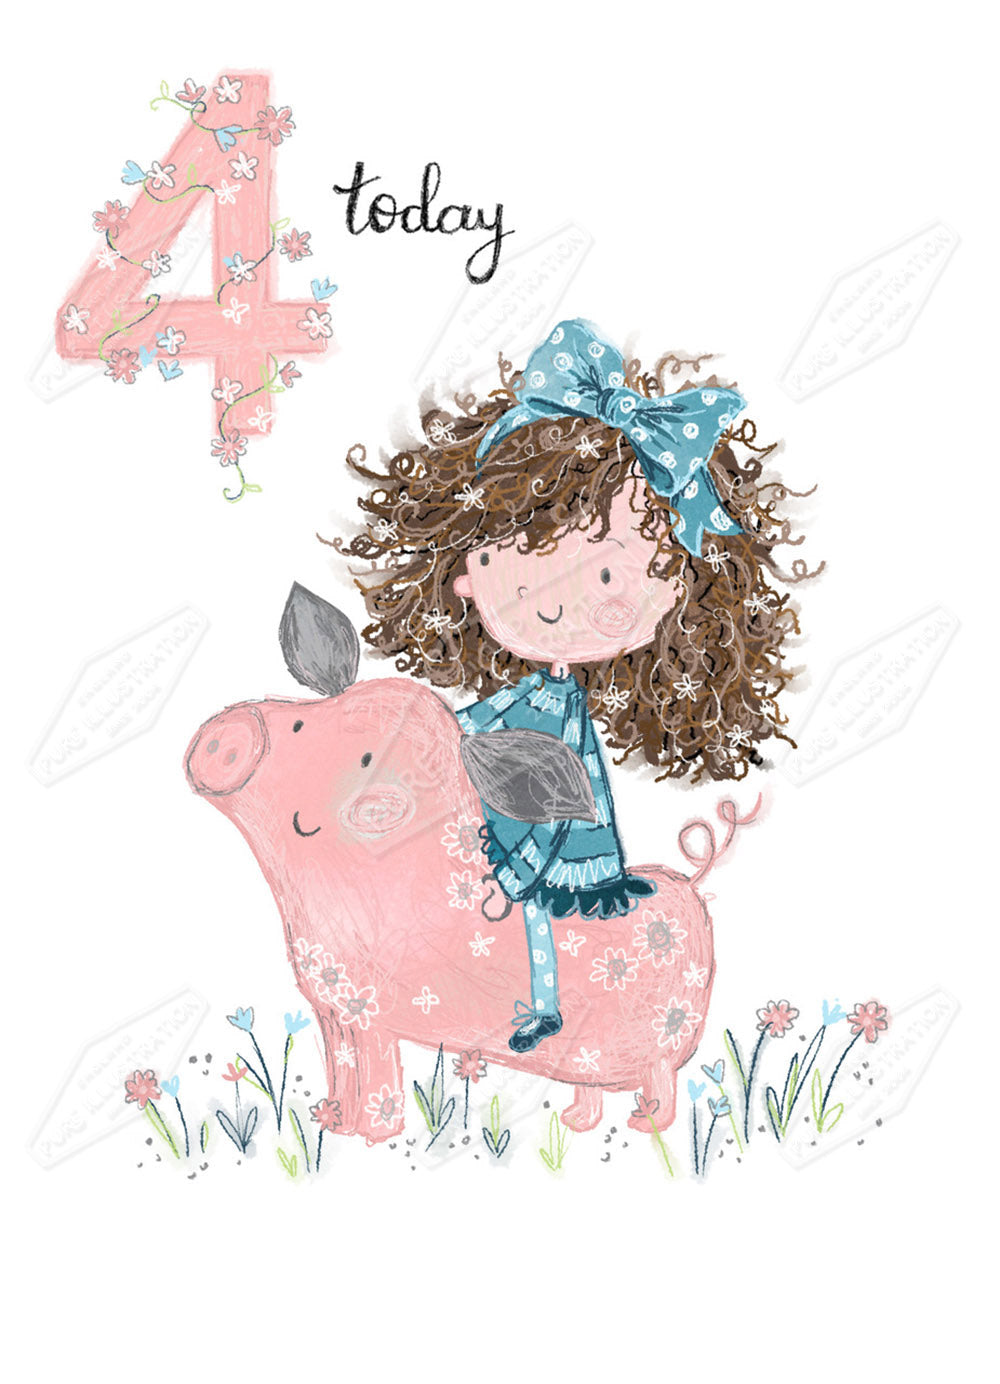 00032424KSP- Kerry Spurling is represented by Pure Art Licensing Agency - Birthday Greeting Card Design